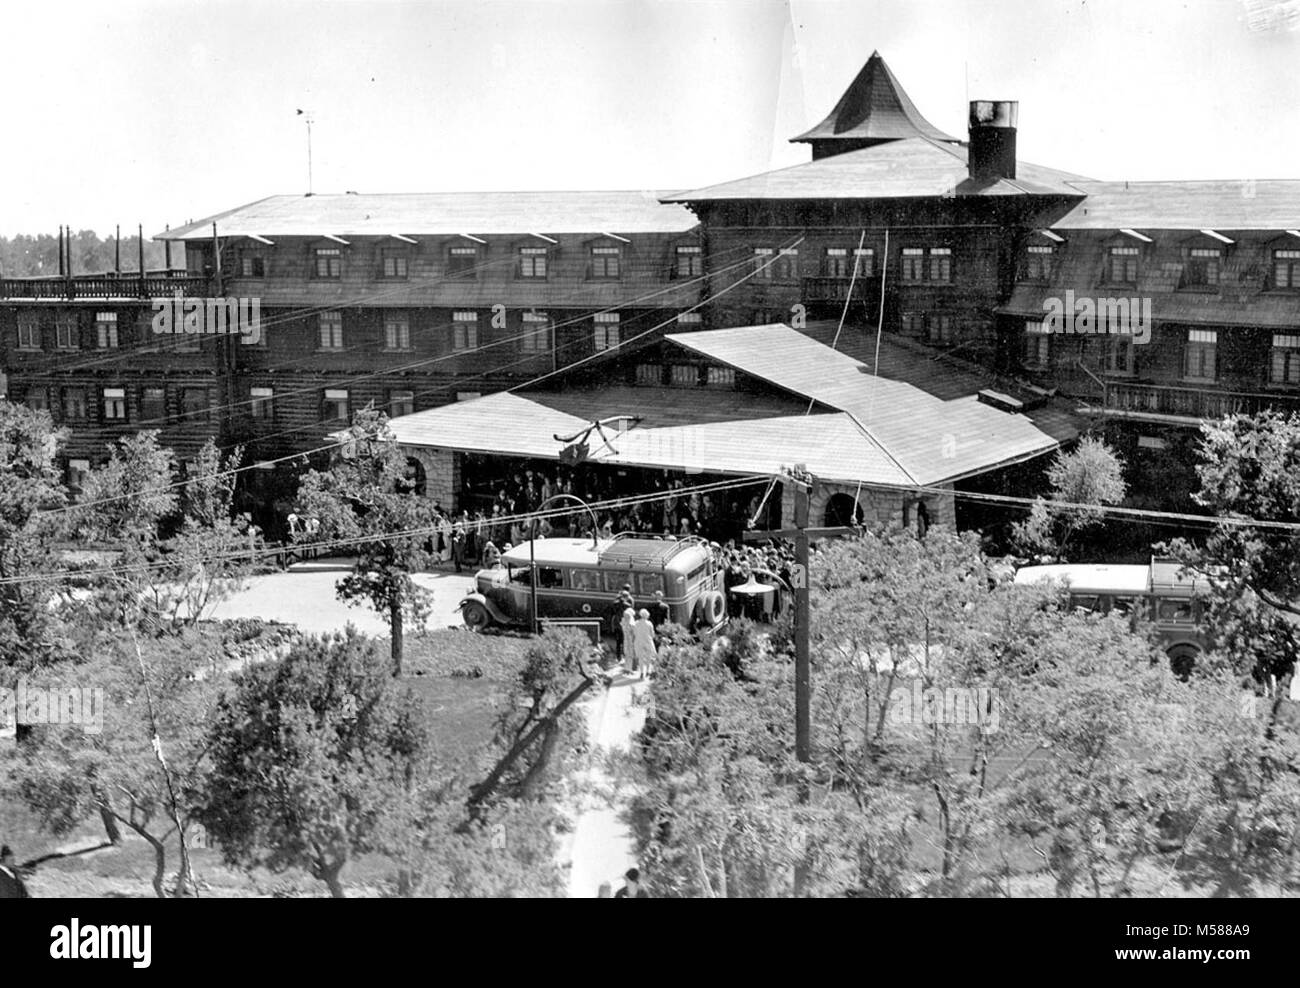 Grand Canyon Historic El Tovar Hotel. TELEPHOTO VIEW OF THE FRONT ENTRANCE TO EL TOVAR HOTEL (FROM THE ROOF OF HOPI HOUSE) HARVEYCAR TOUR BUSSES PARKED IN FRONT. LARGE SHRINER GROUP ON PORCH. CIRCA 1931. FRED HARVEY PHOTO. Historic photo from , Stock Photo